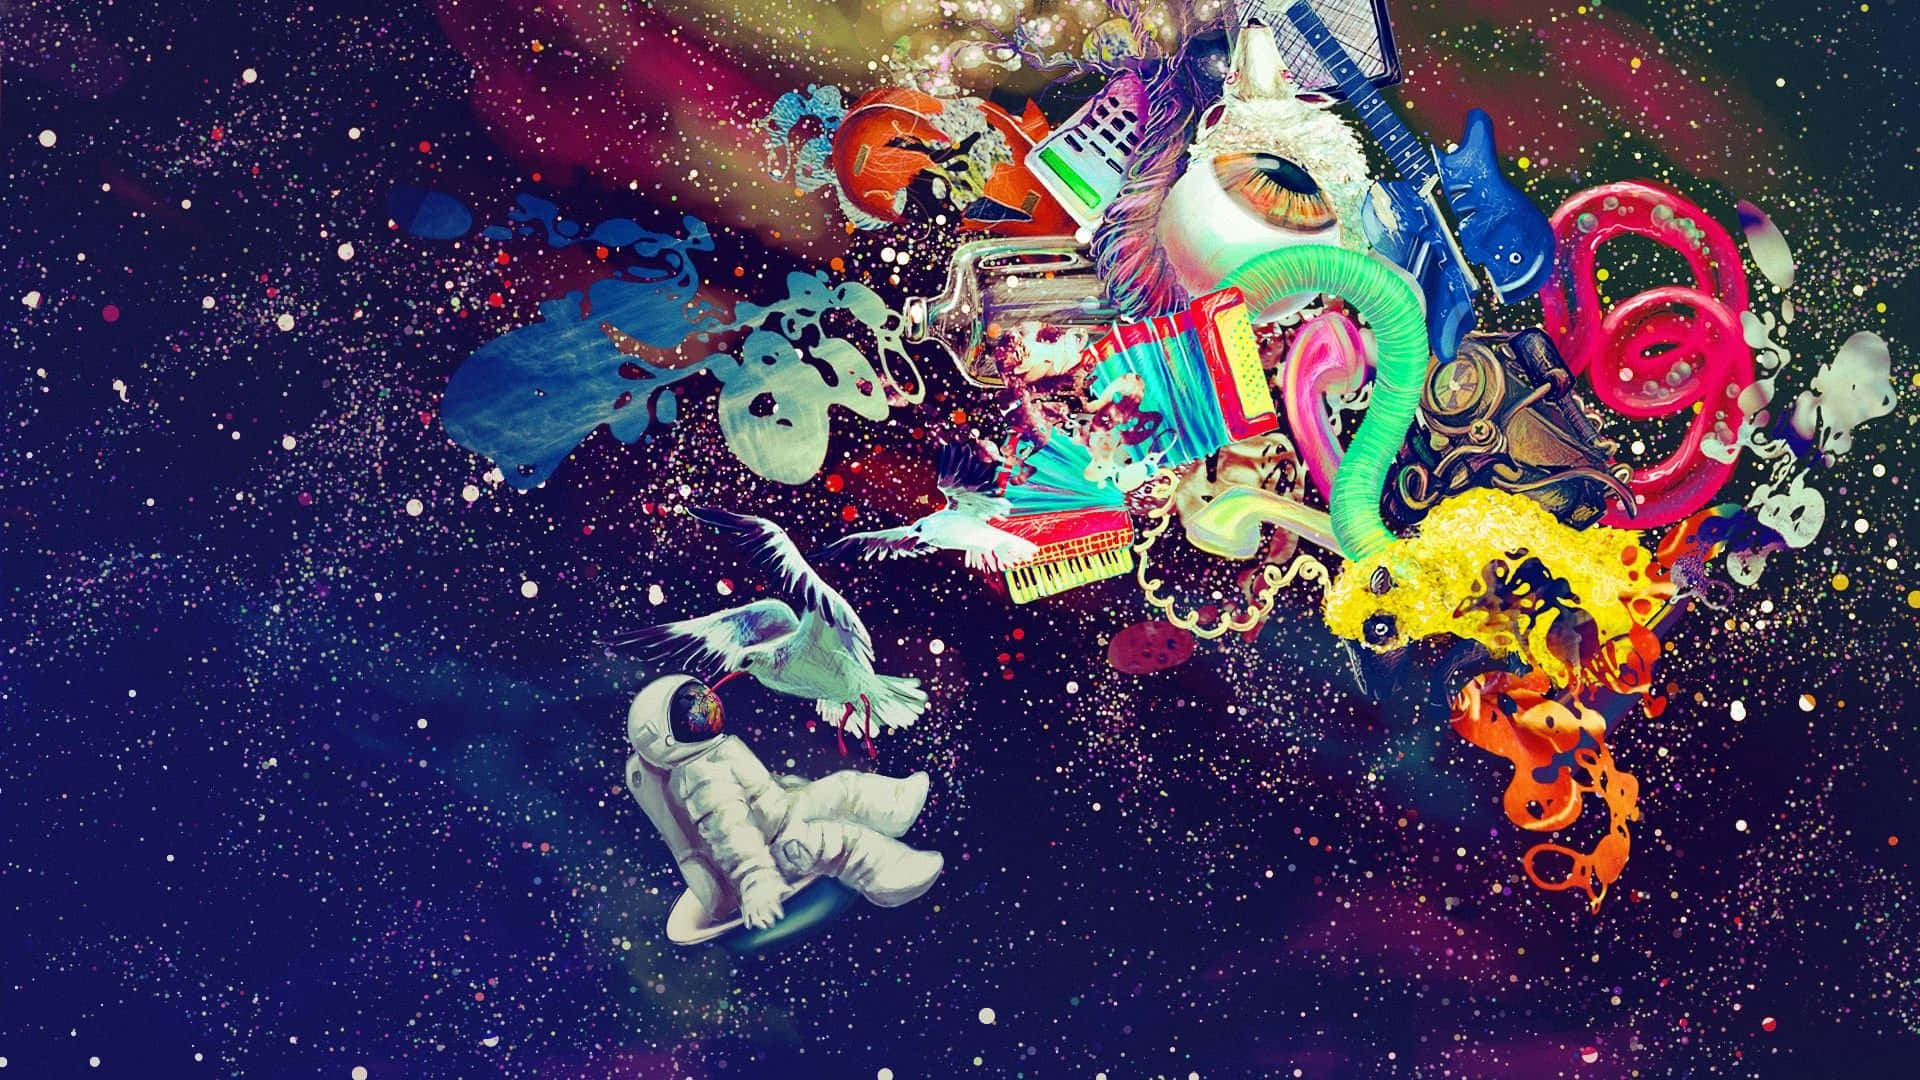 “Beautifully Colorful and Abstract Trippy Desktop” Wallpaper